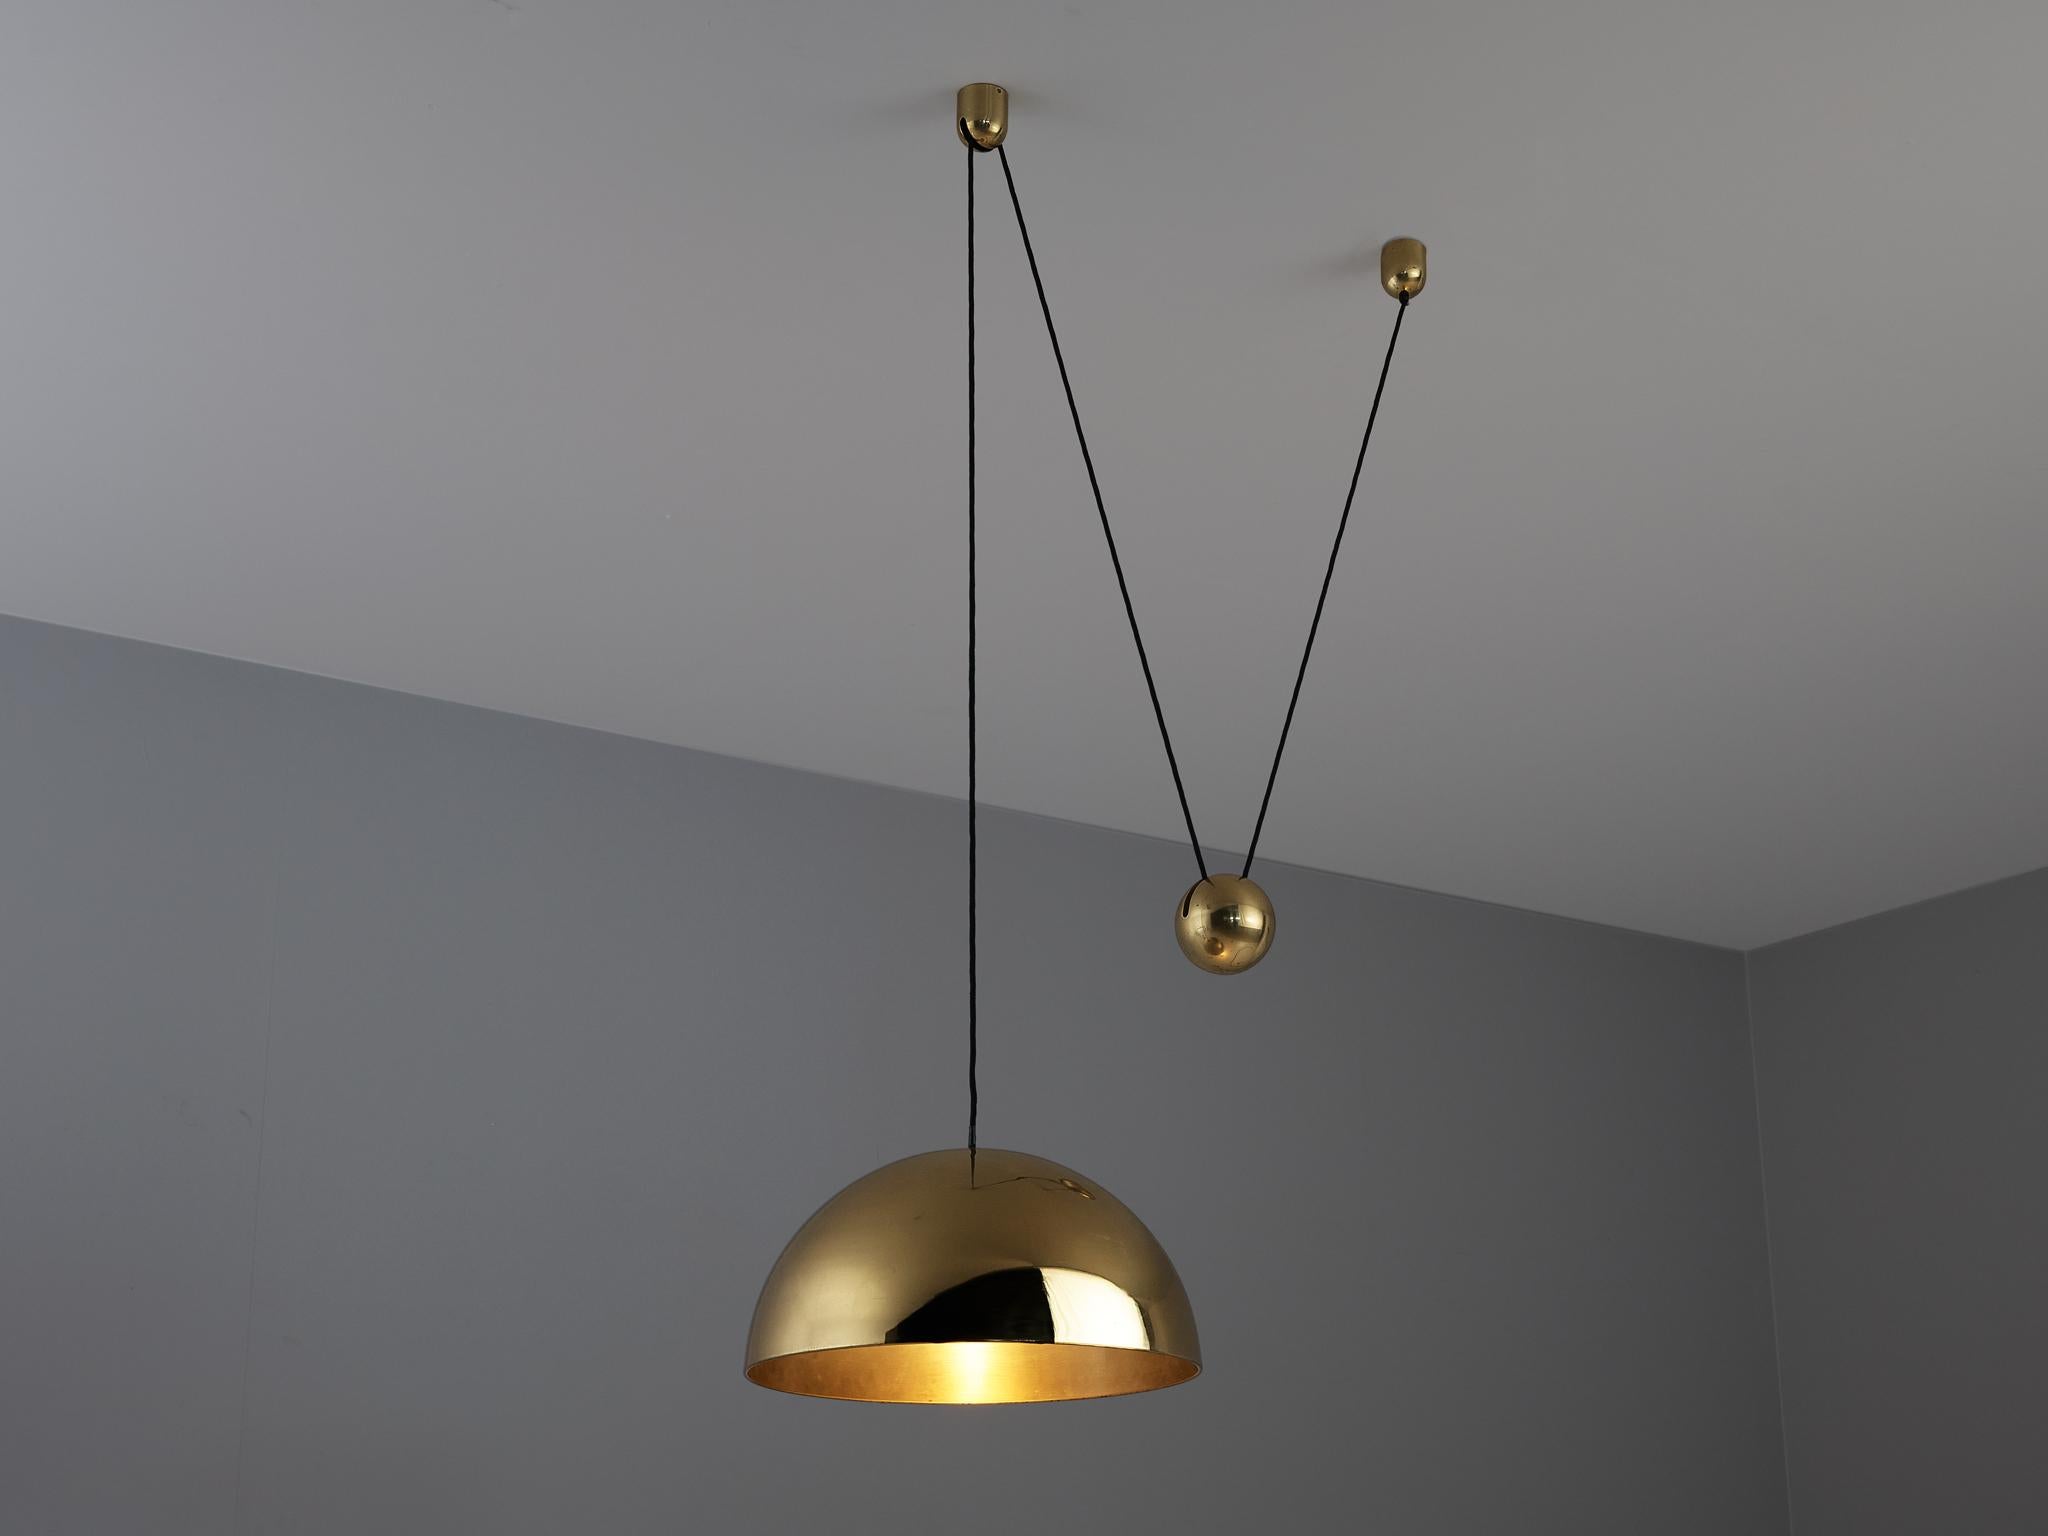 Florian Schulz, counterweight pendant, model 'Solan', brass, wire, Germany, 1980s. 

Very elegant shaped brass pendant designed by Florian Schultz. This well made piece is equipped with a hemisphere brass shade. Due to the heavy counterweight and